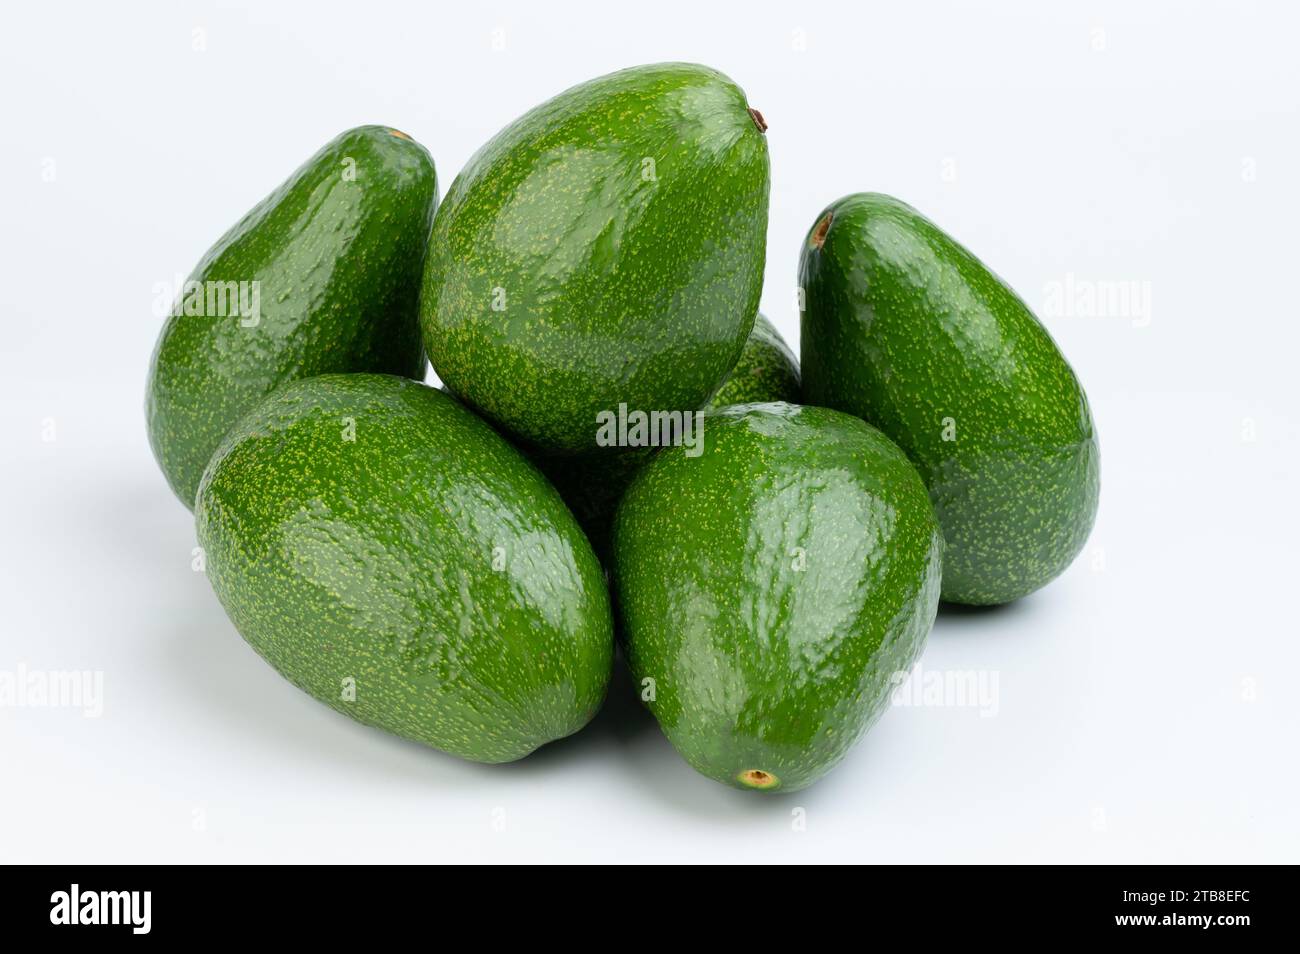 Pile of group green avocados isolated on white studio background Stock Photo